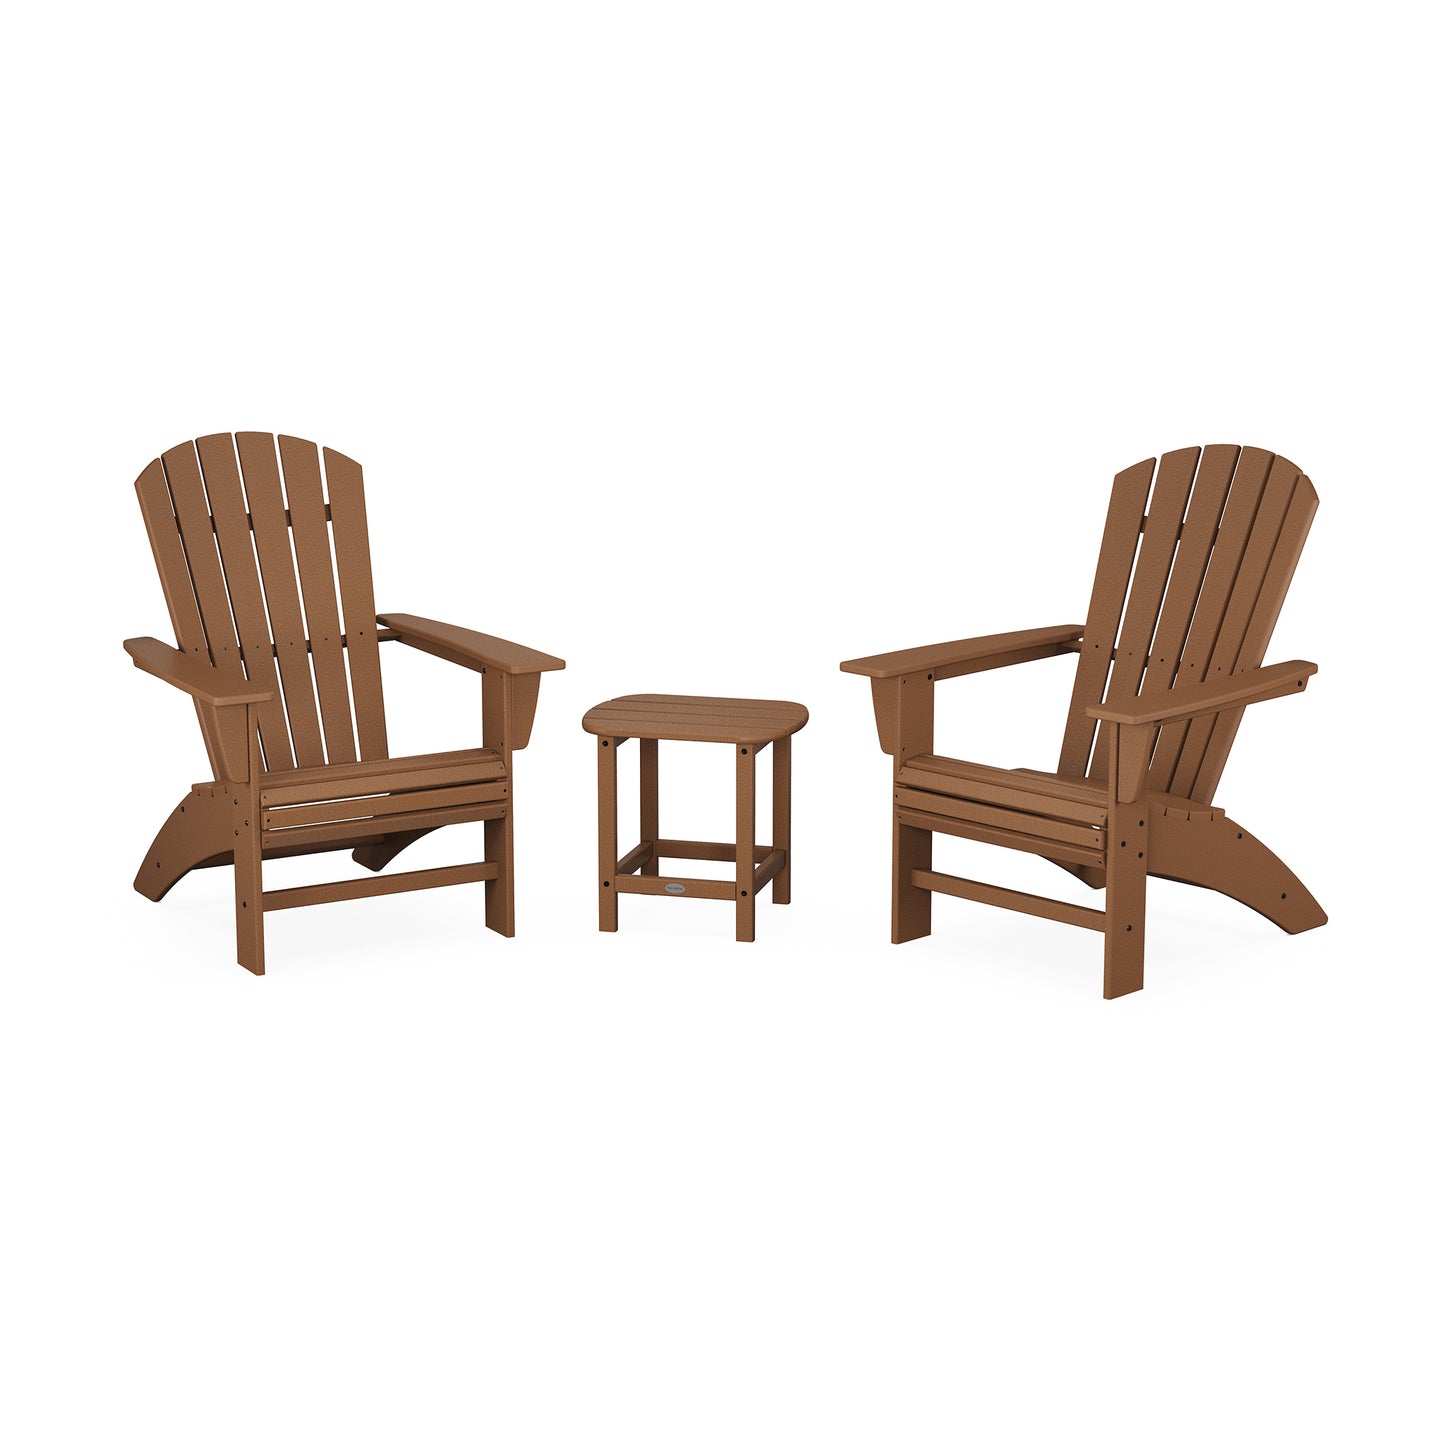 Two brown POLYWOOD Nautical 3-Piece Curveback Adirondack chairs with a matching small side table on a plain white background. The chairs are wooden with a slatted design.